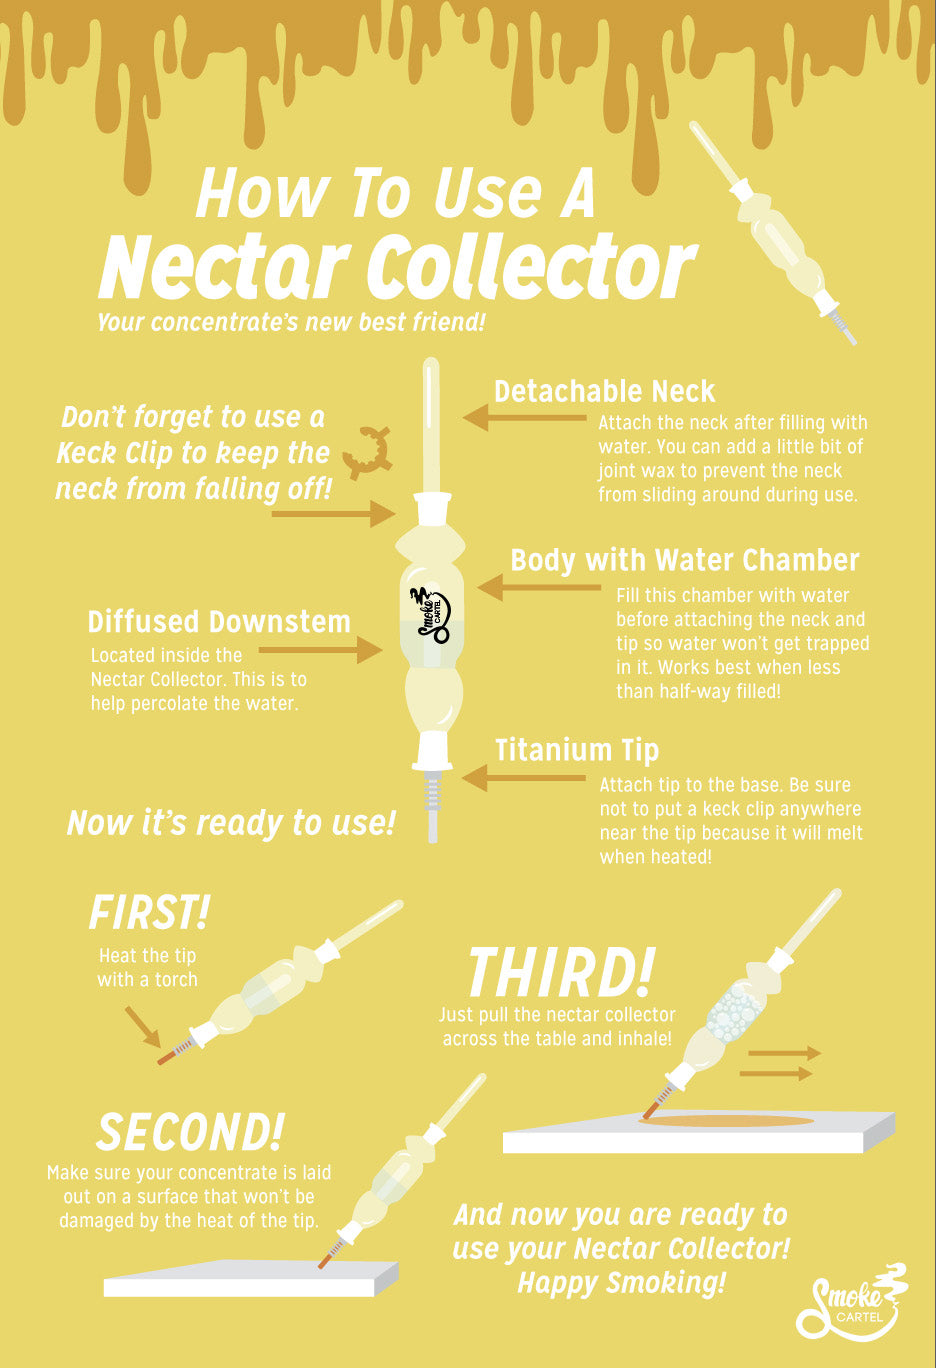 How to Use a Nectar Collector - Infographic